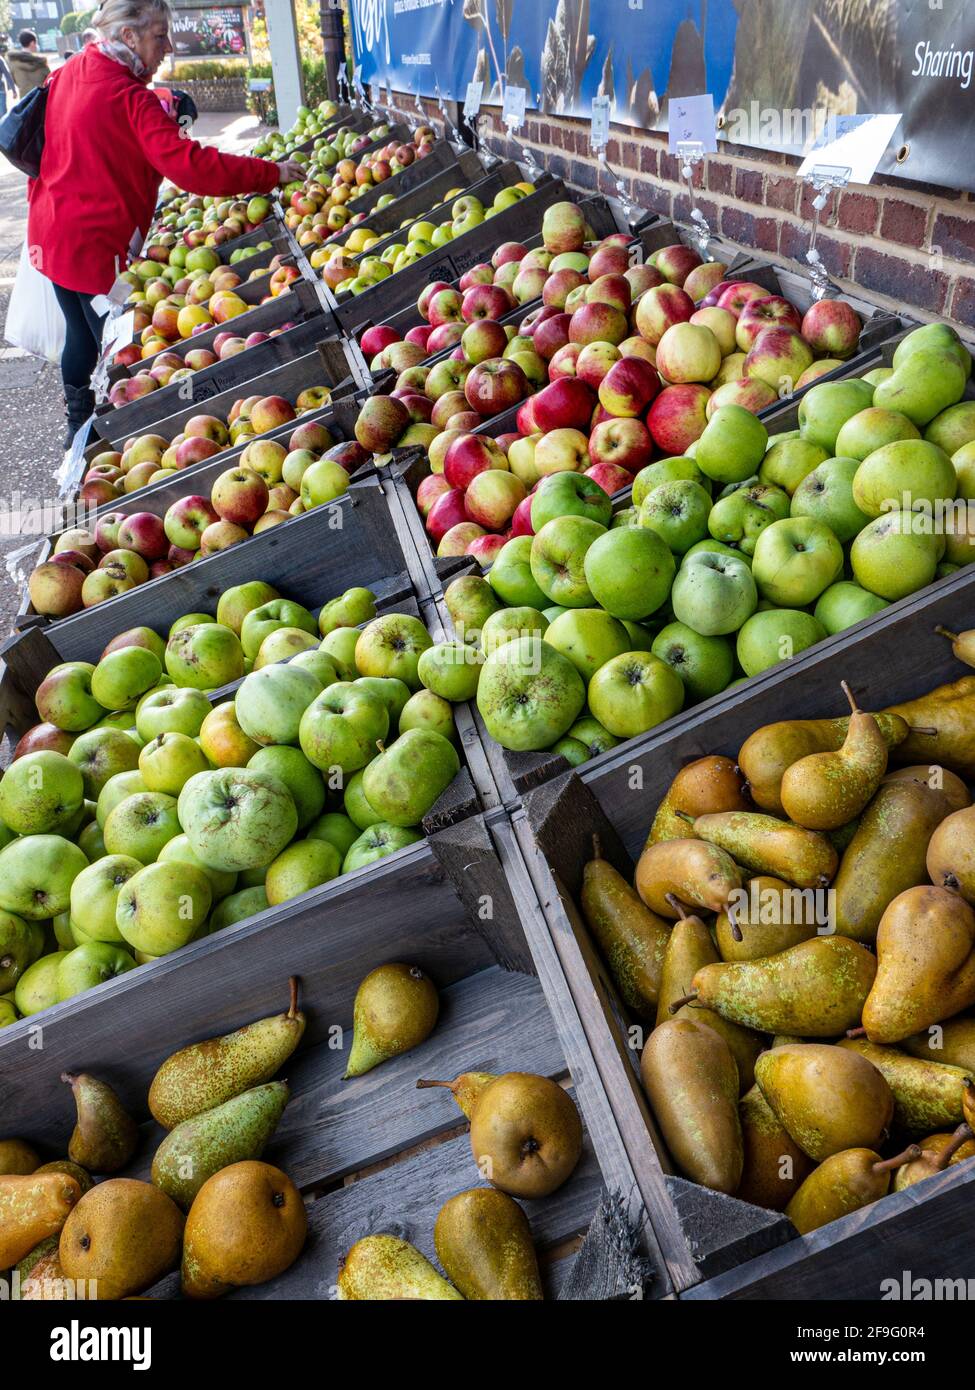 British Fruit Display of apples and pears in wooden crates at Farmers Market, with female shopper browsing the varieties and selection UK Stock Photo